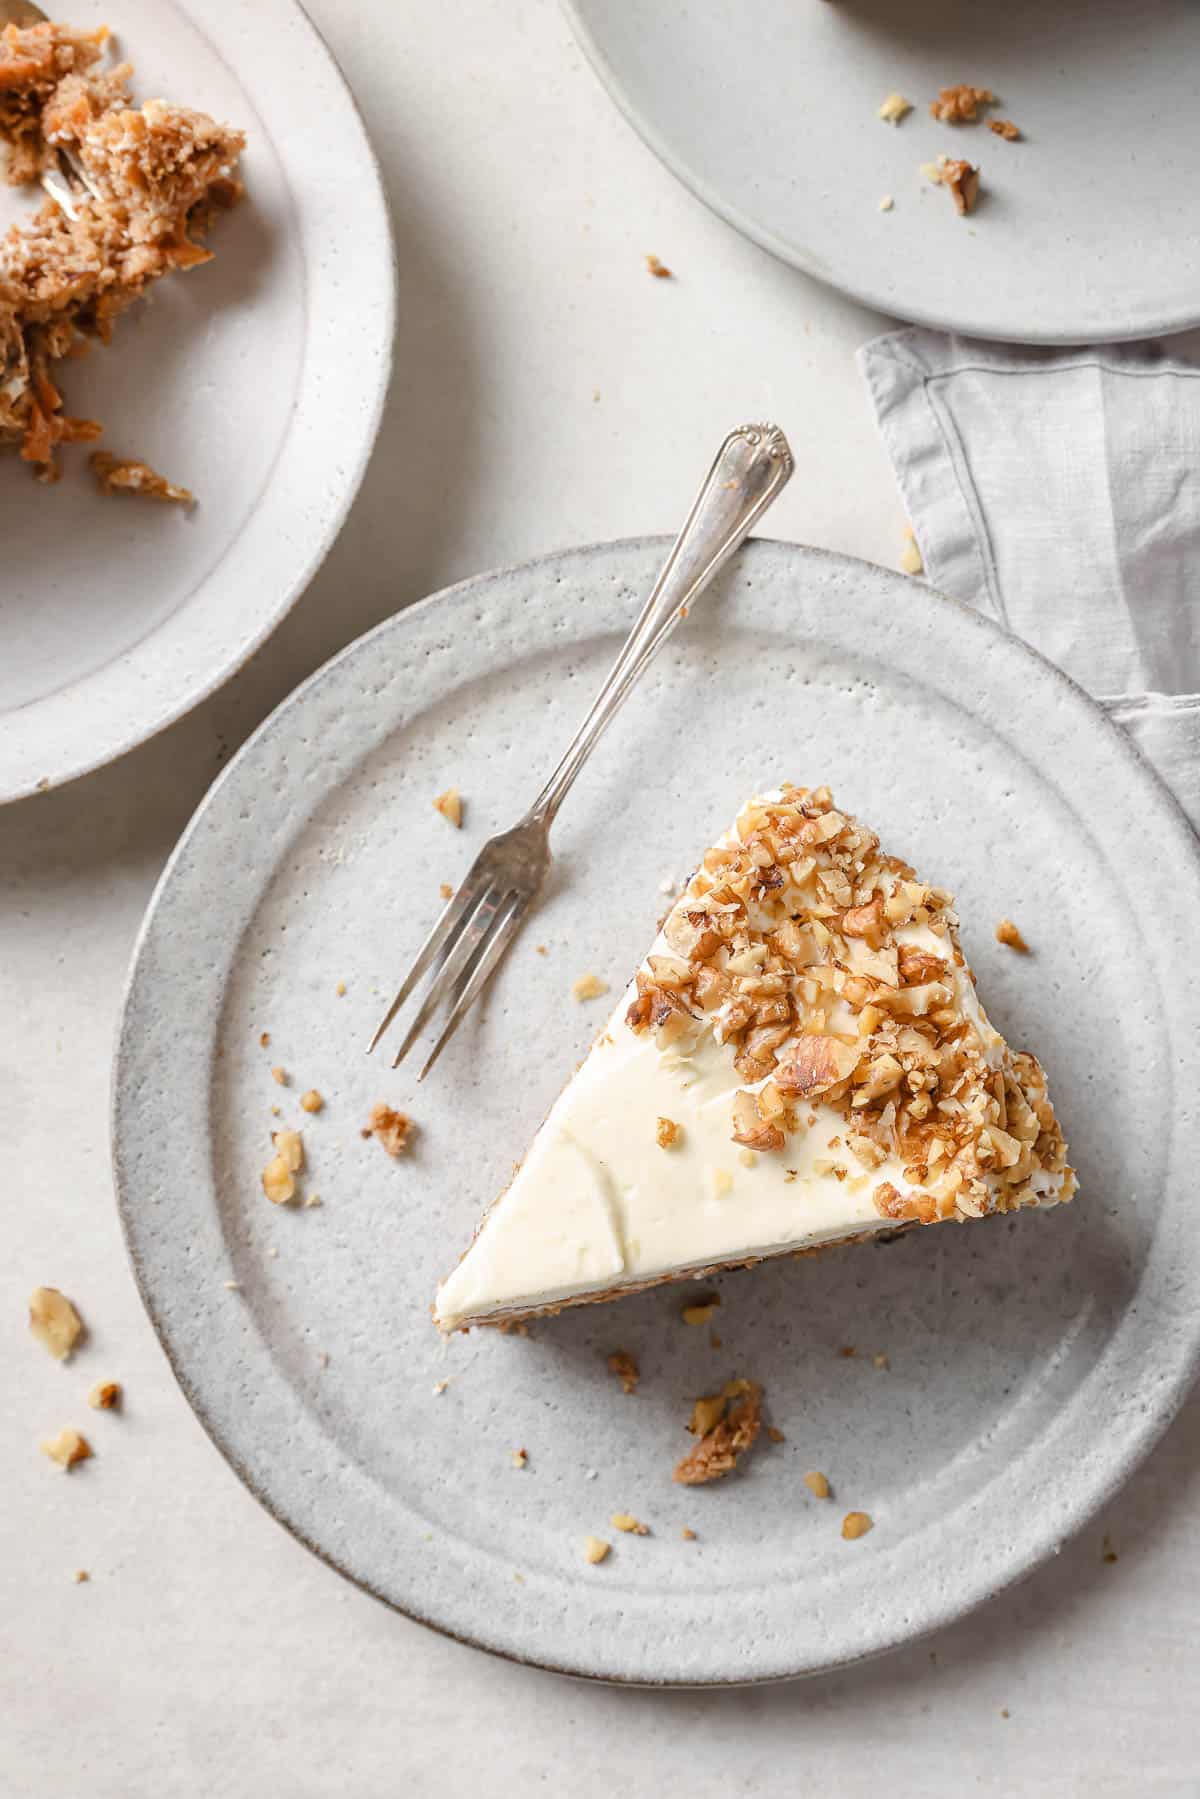 A slice of freshly baked and frosted double layer carrot cake with cream cheese frosting and toasted walnuts.